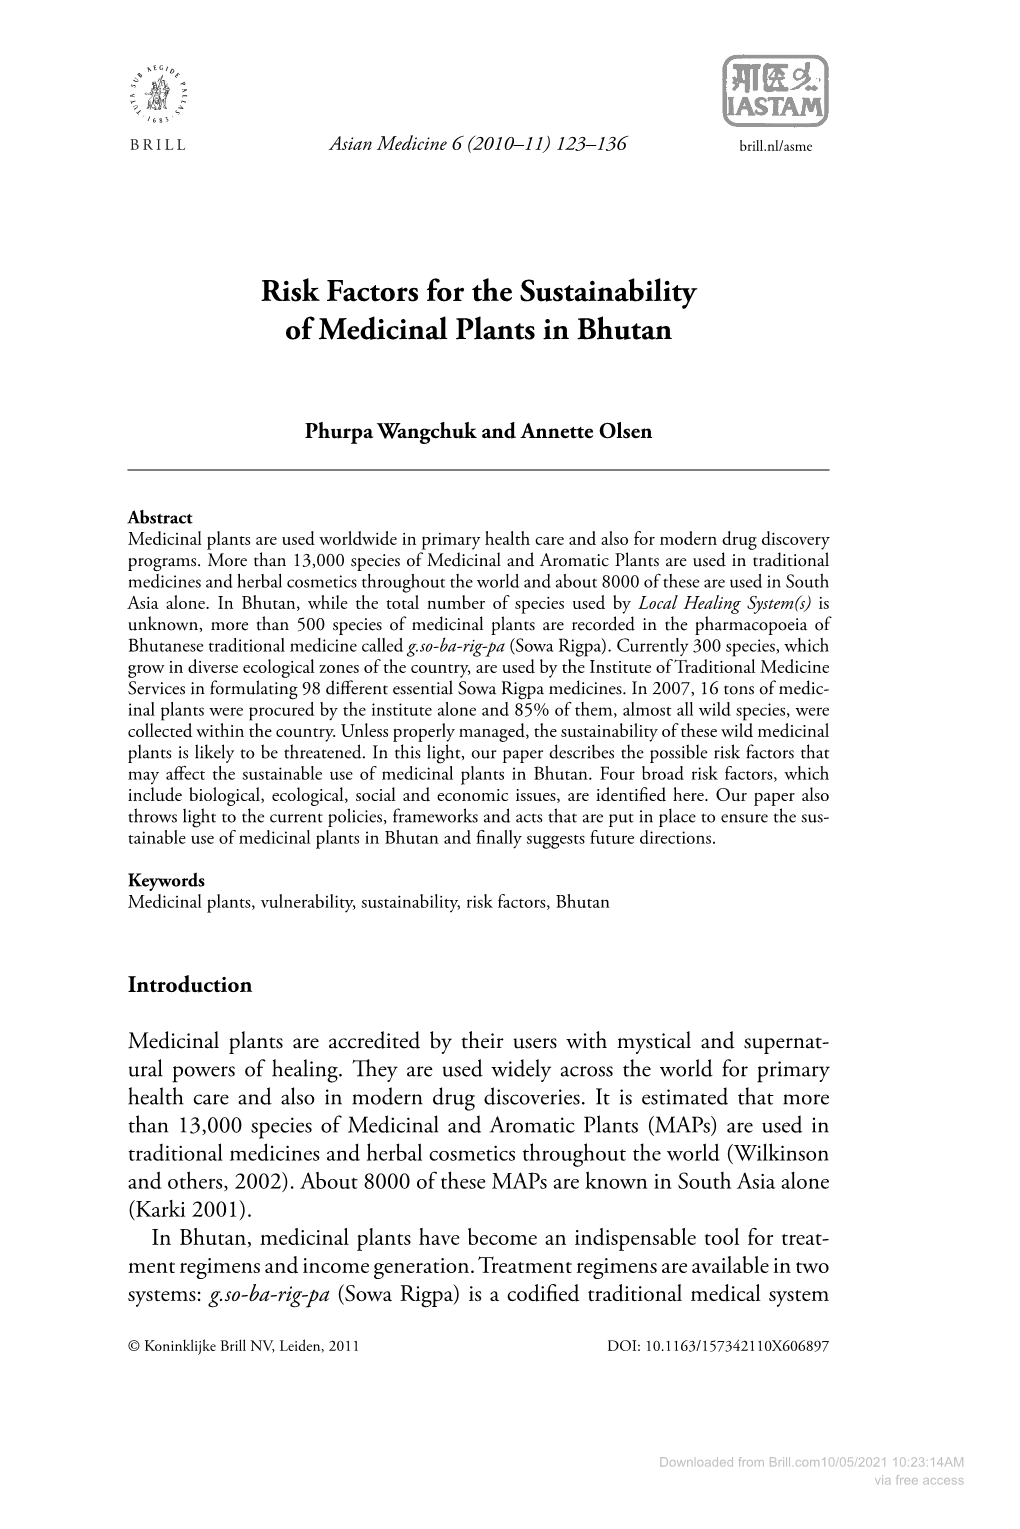 Risk Factors for the Sustainability of Medicinal Plants in Bhutan